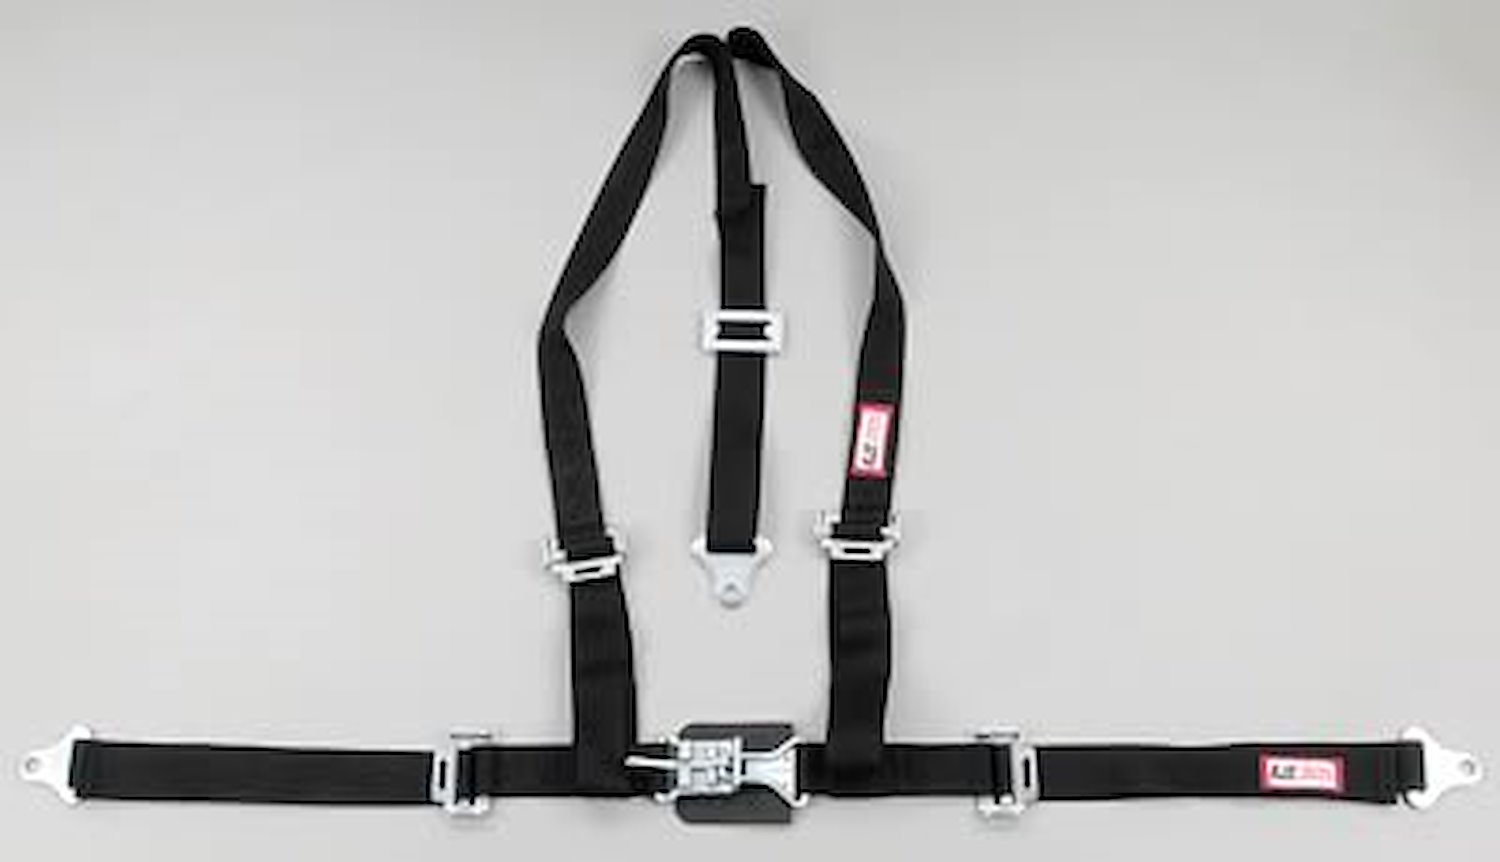 NON-SFI L&L HARNESS 3 PULL UP Lap Belt SEWN IN 2 Shoulder Harness V ROLL BAR Mount ALL WRAP ENDS GRAY